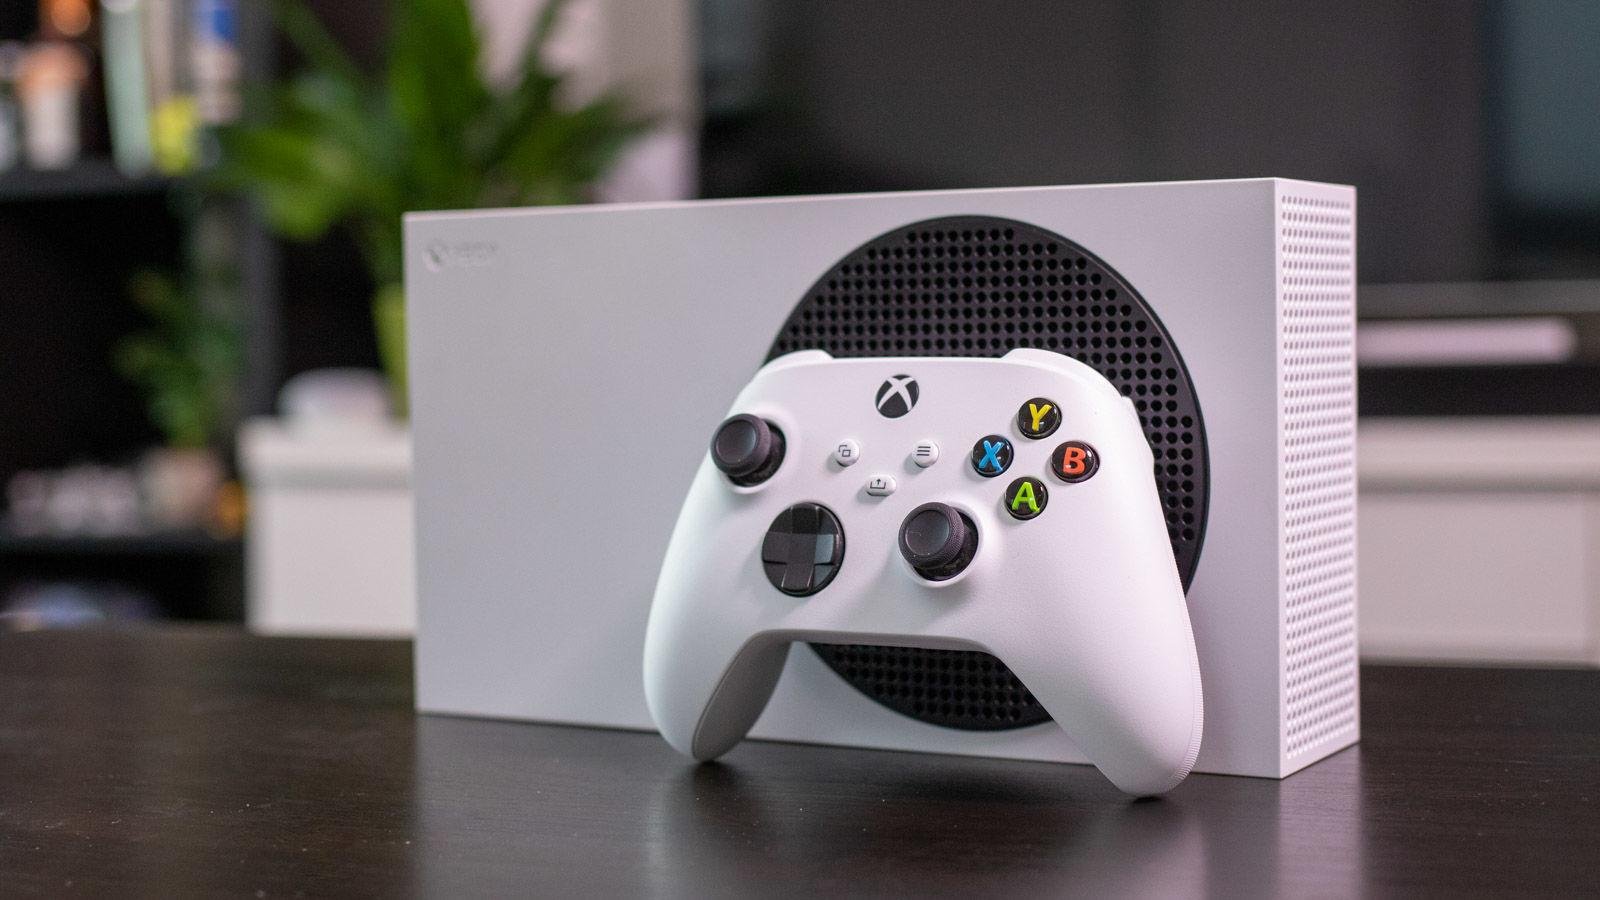 Assign $60 off the Xbox Sequence S and earn a $40 Amazon gift card too